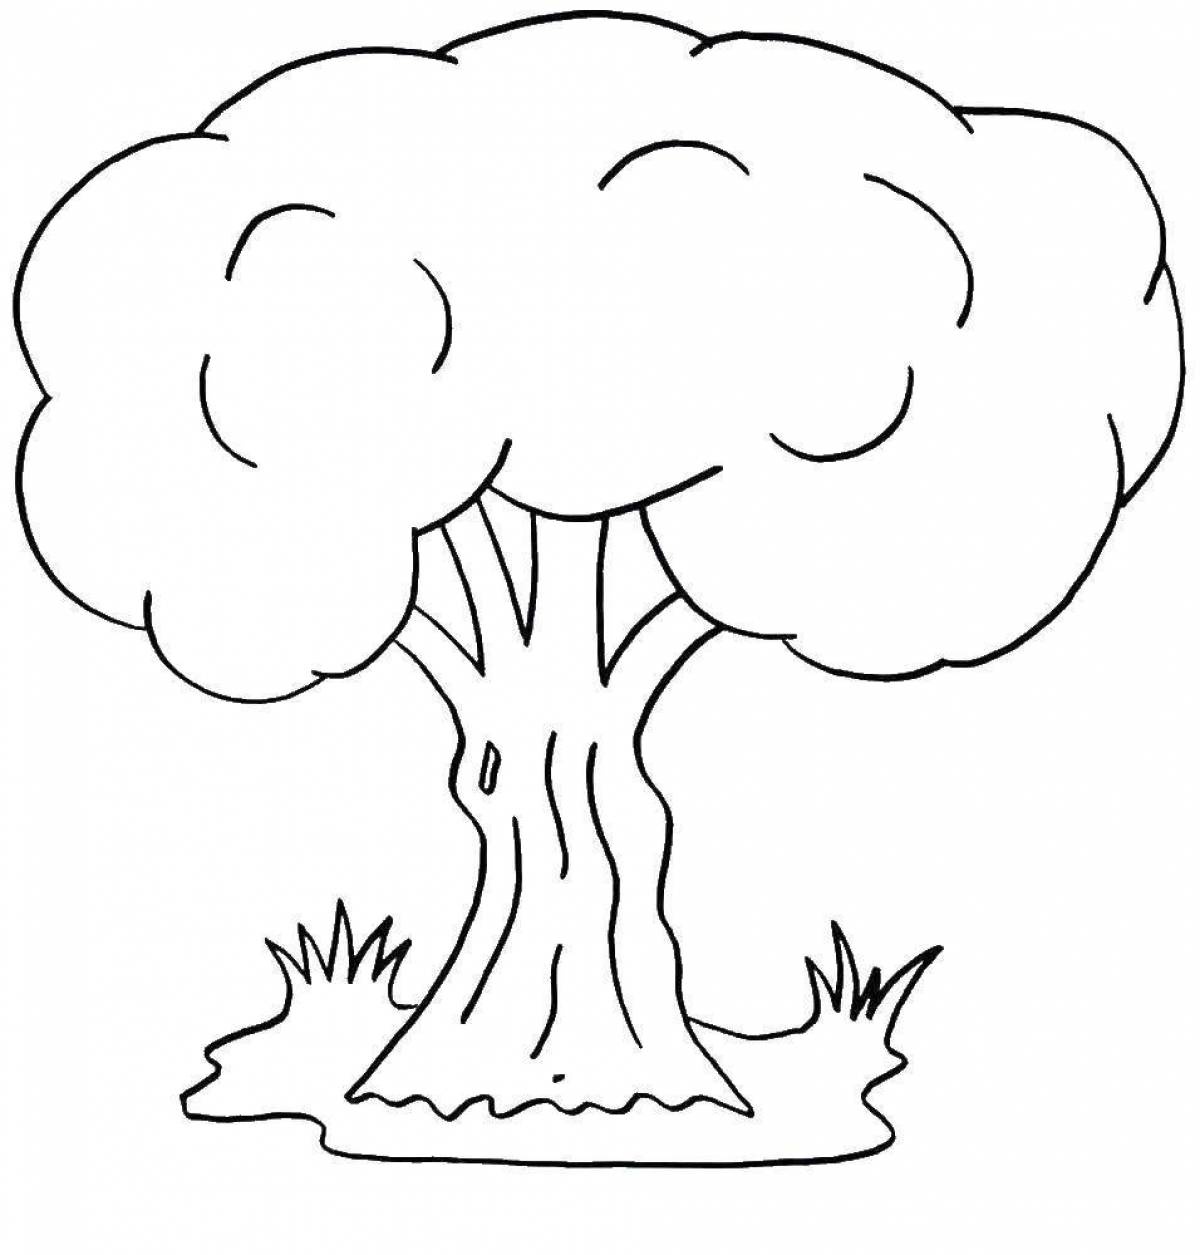 Adorable tree coloring page for kids